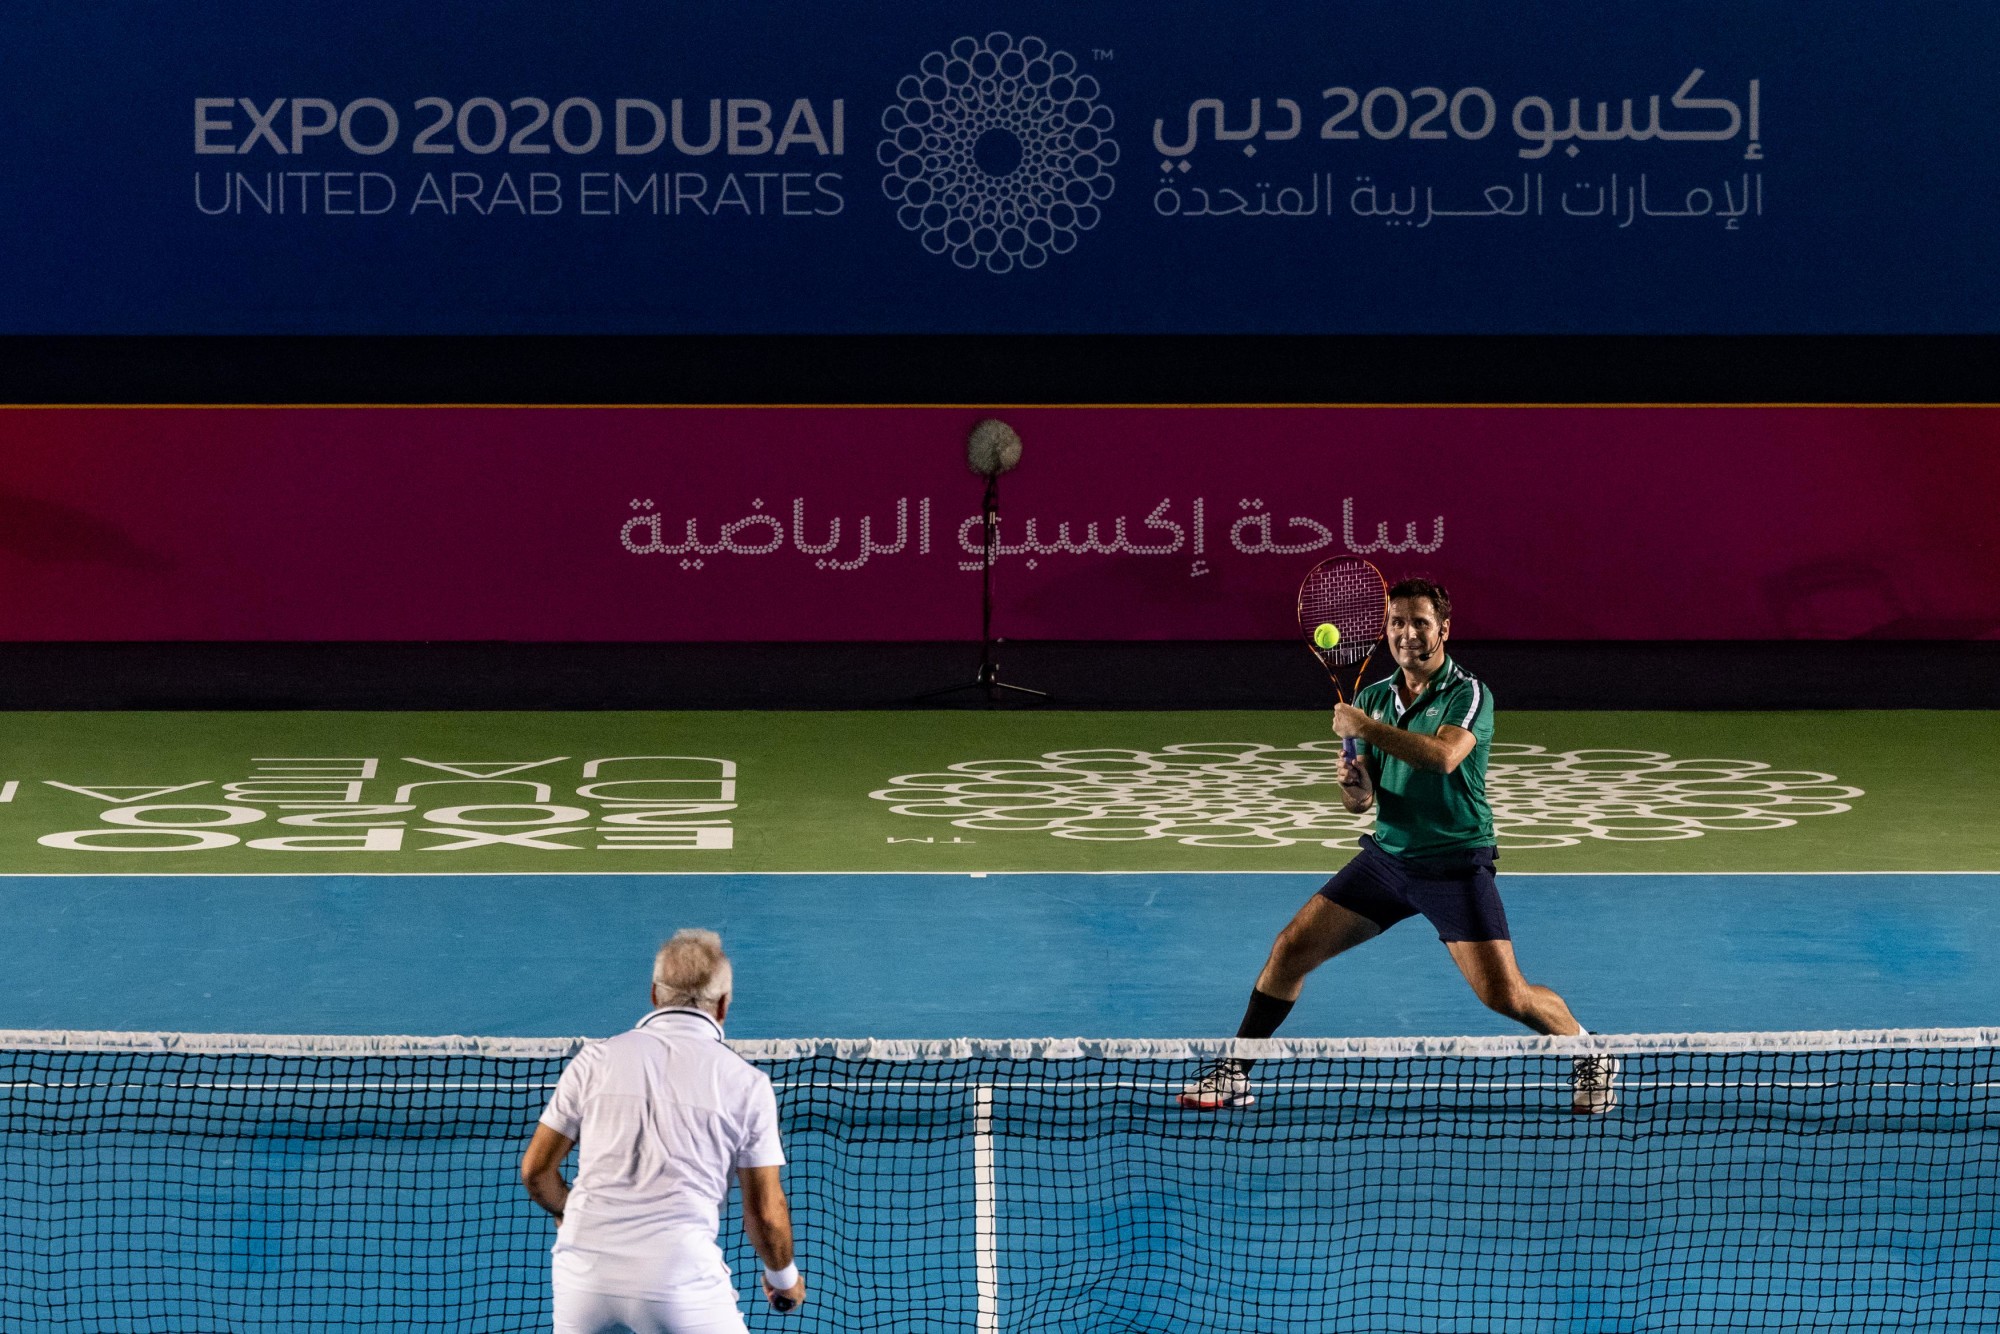 Men-s Exhibition Match between Mansour Bahram and Fabrice Santoro during World Tennis week at the Expo Sports Arena m52825